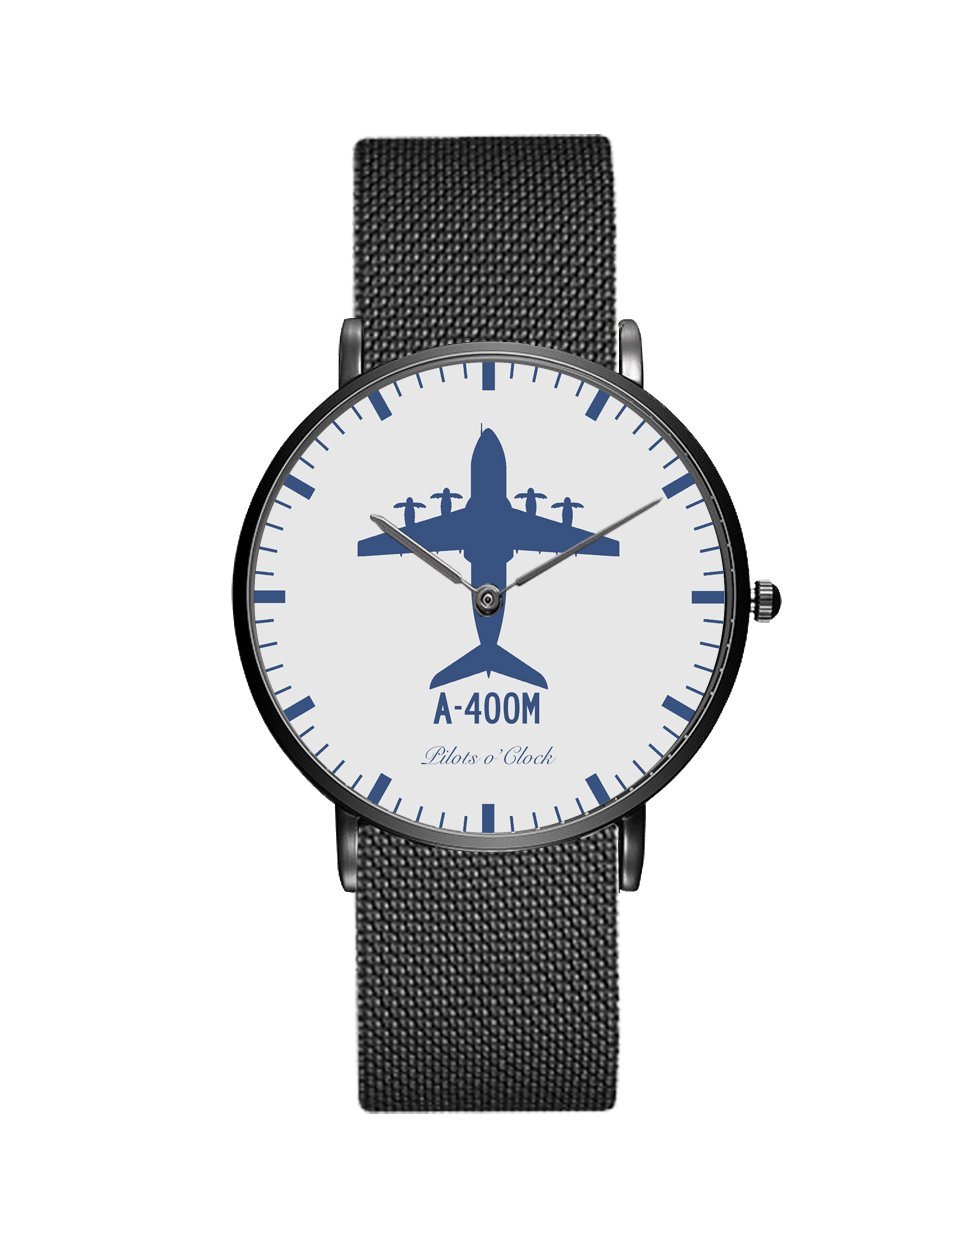 Airbus A400M Stainless Steel Strap Watches Pilot Eyes Store Black & Stainless Steel Strap 